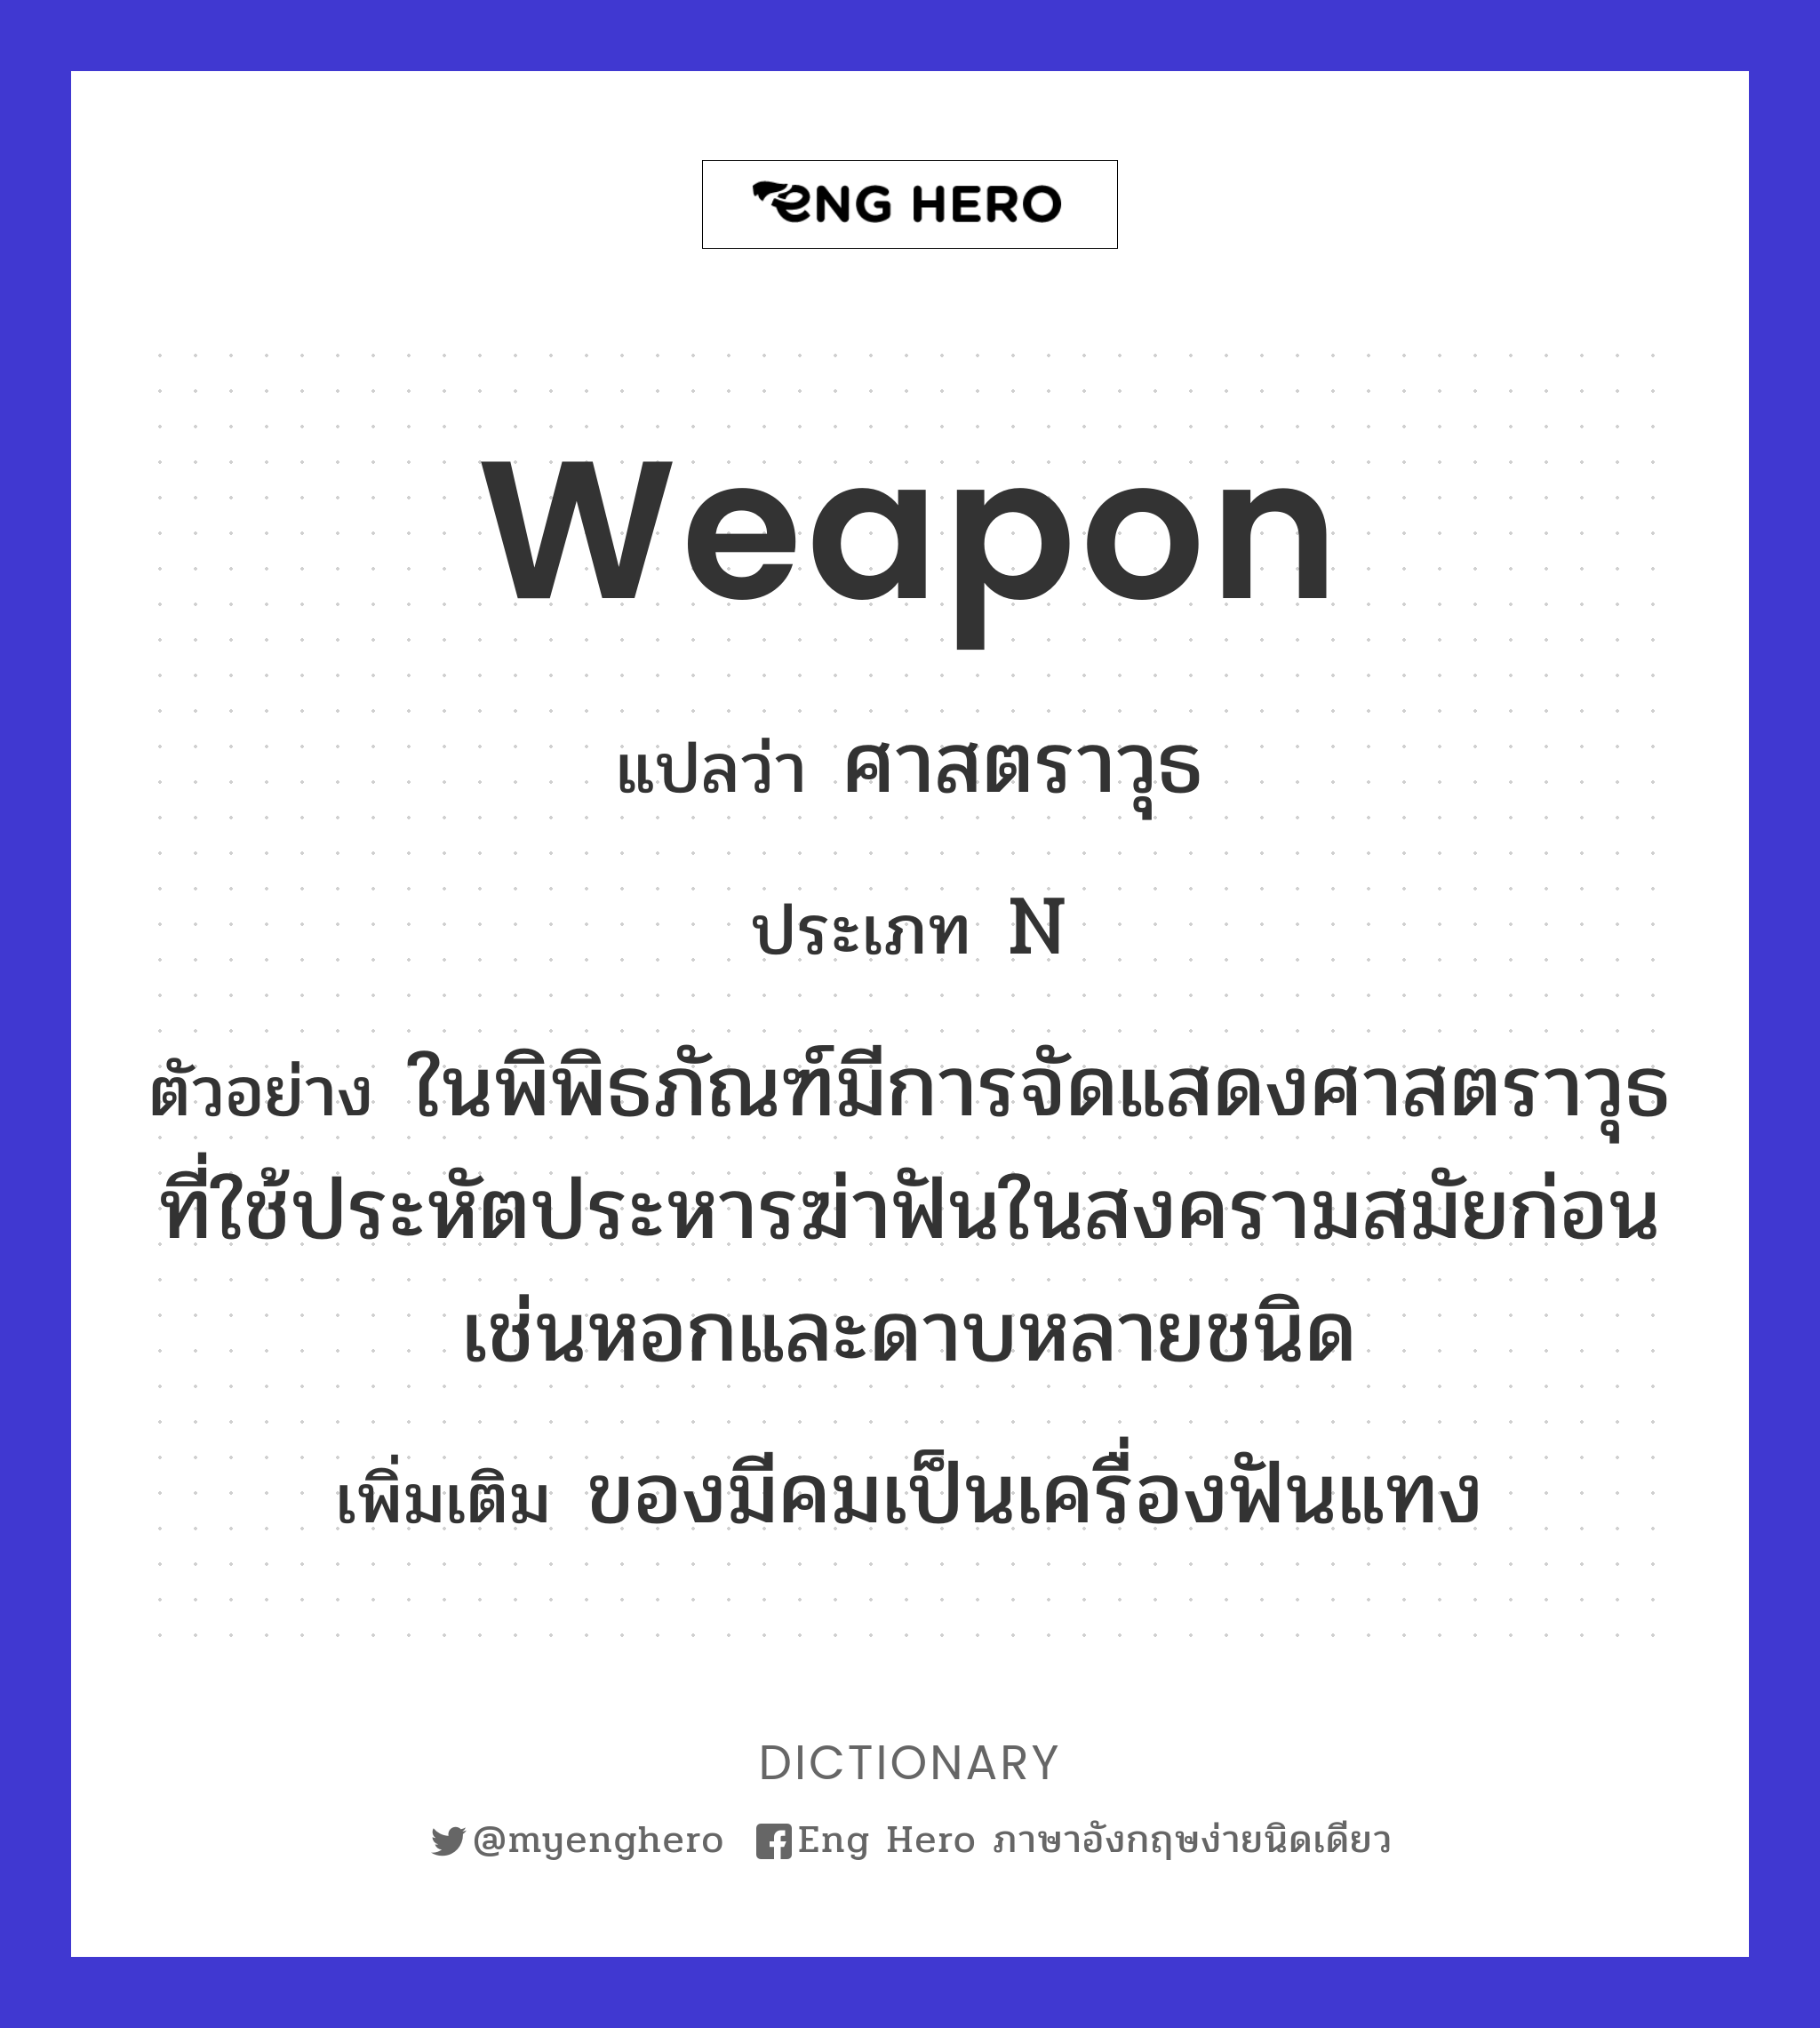 weapon